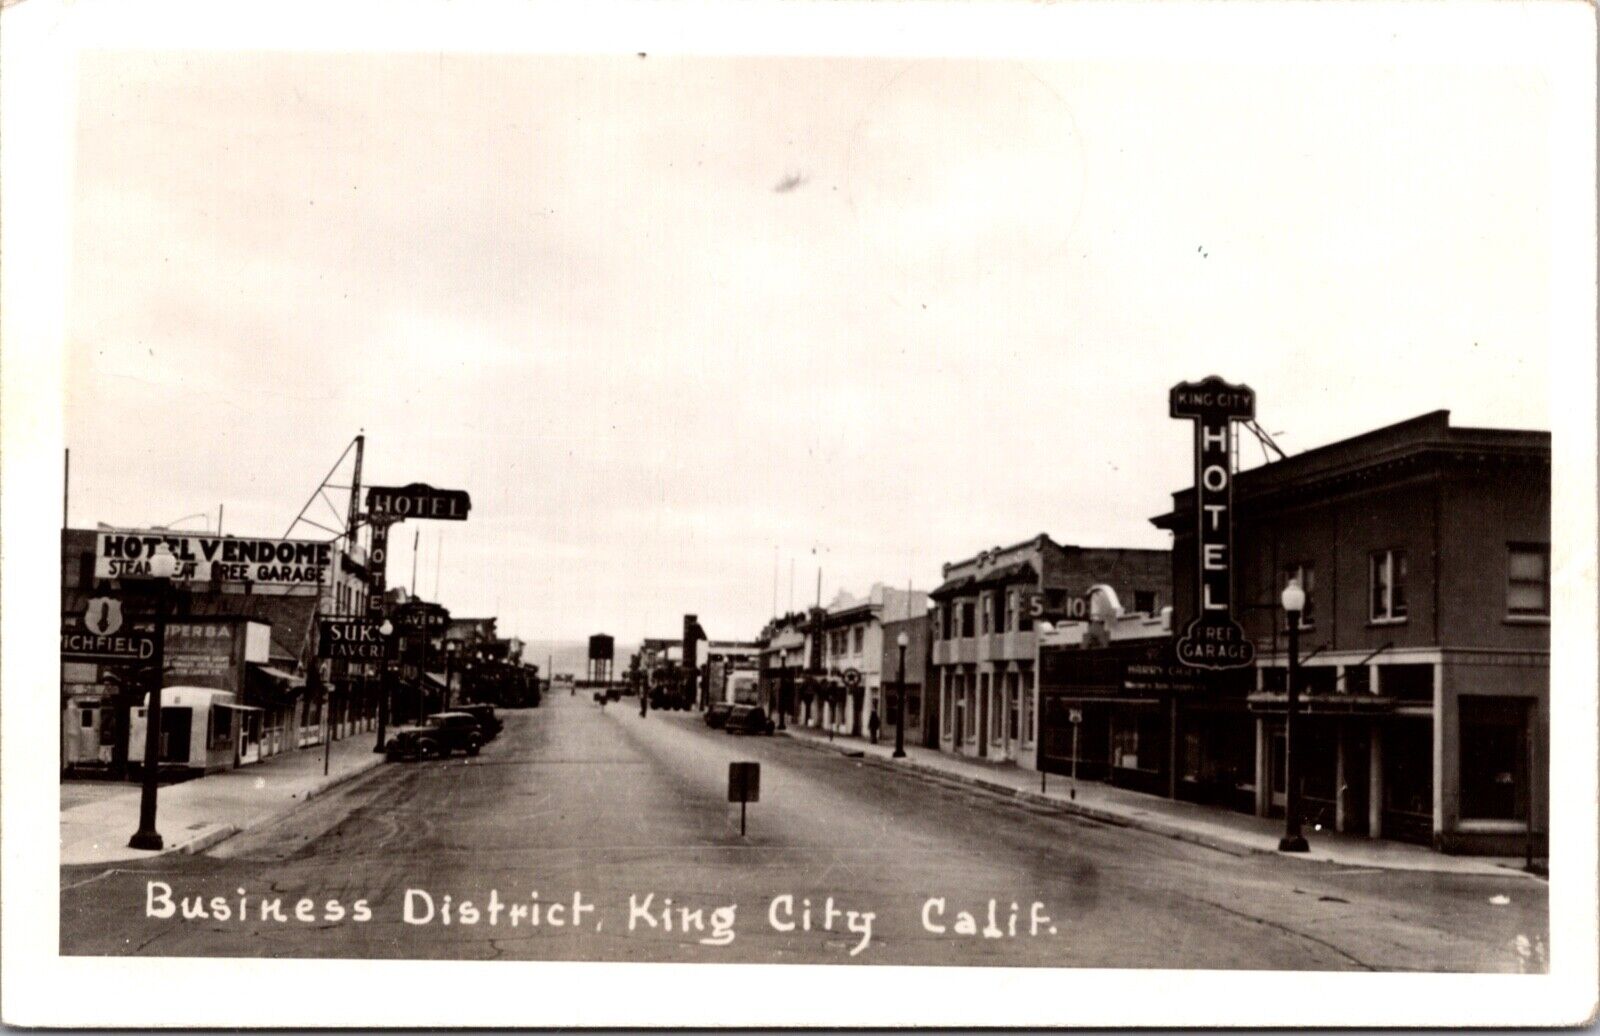 1951 Real Photo Postcard Business District Street Scene in King City, California